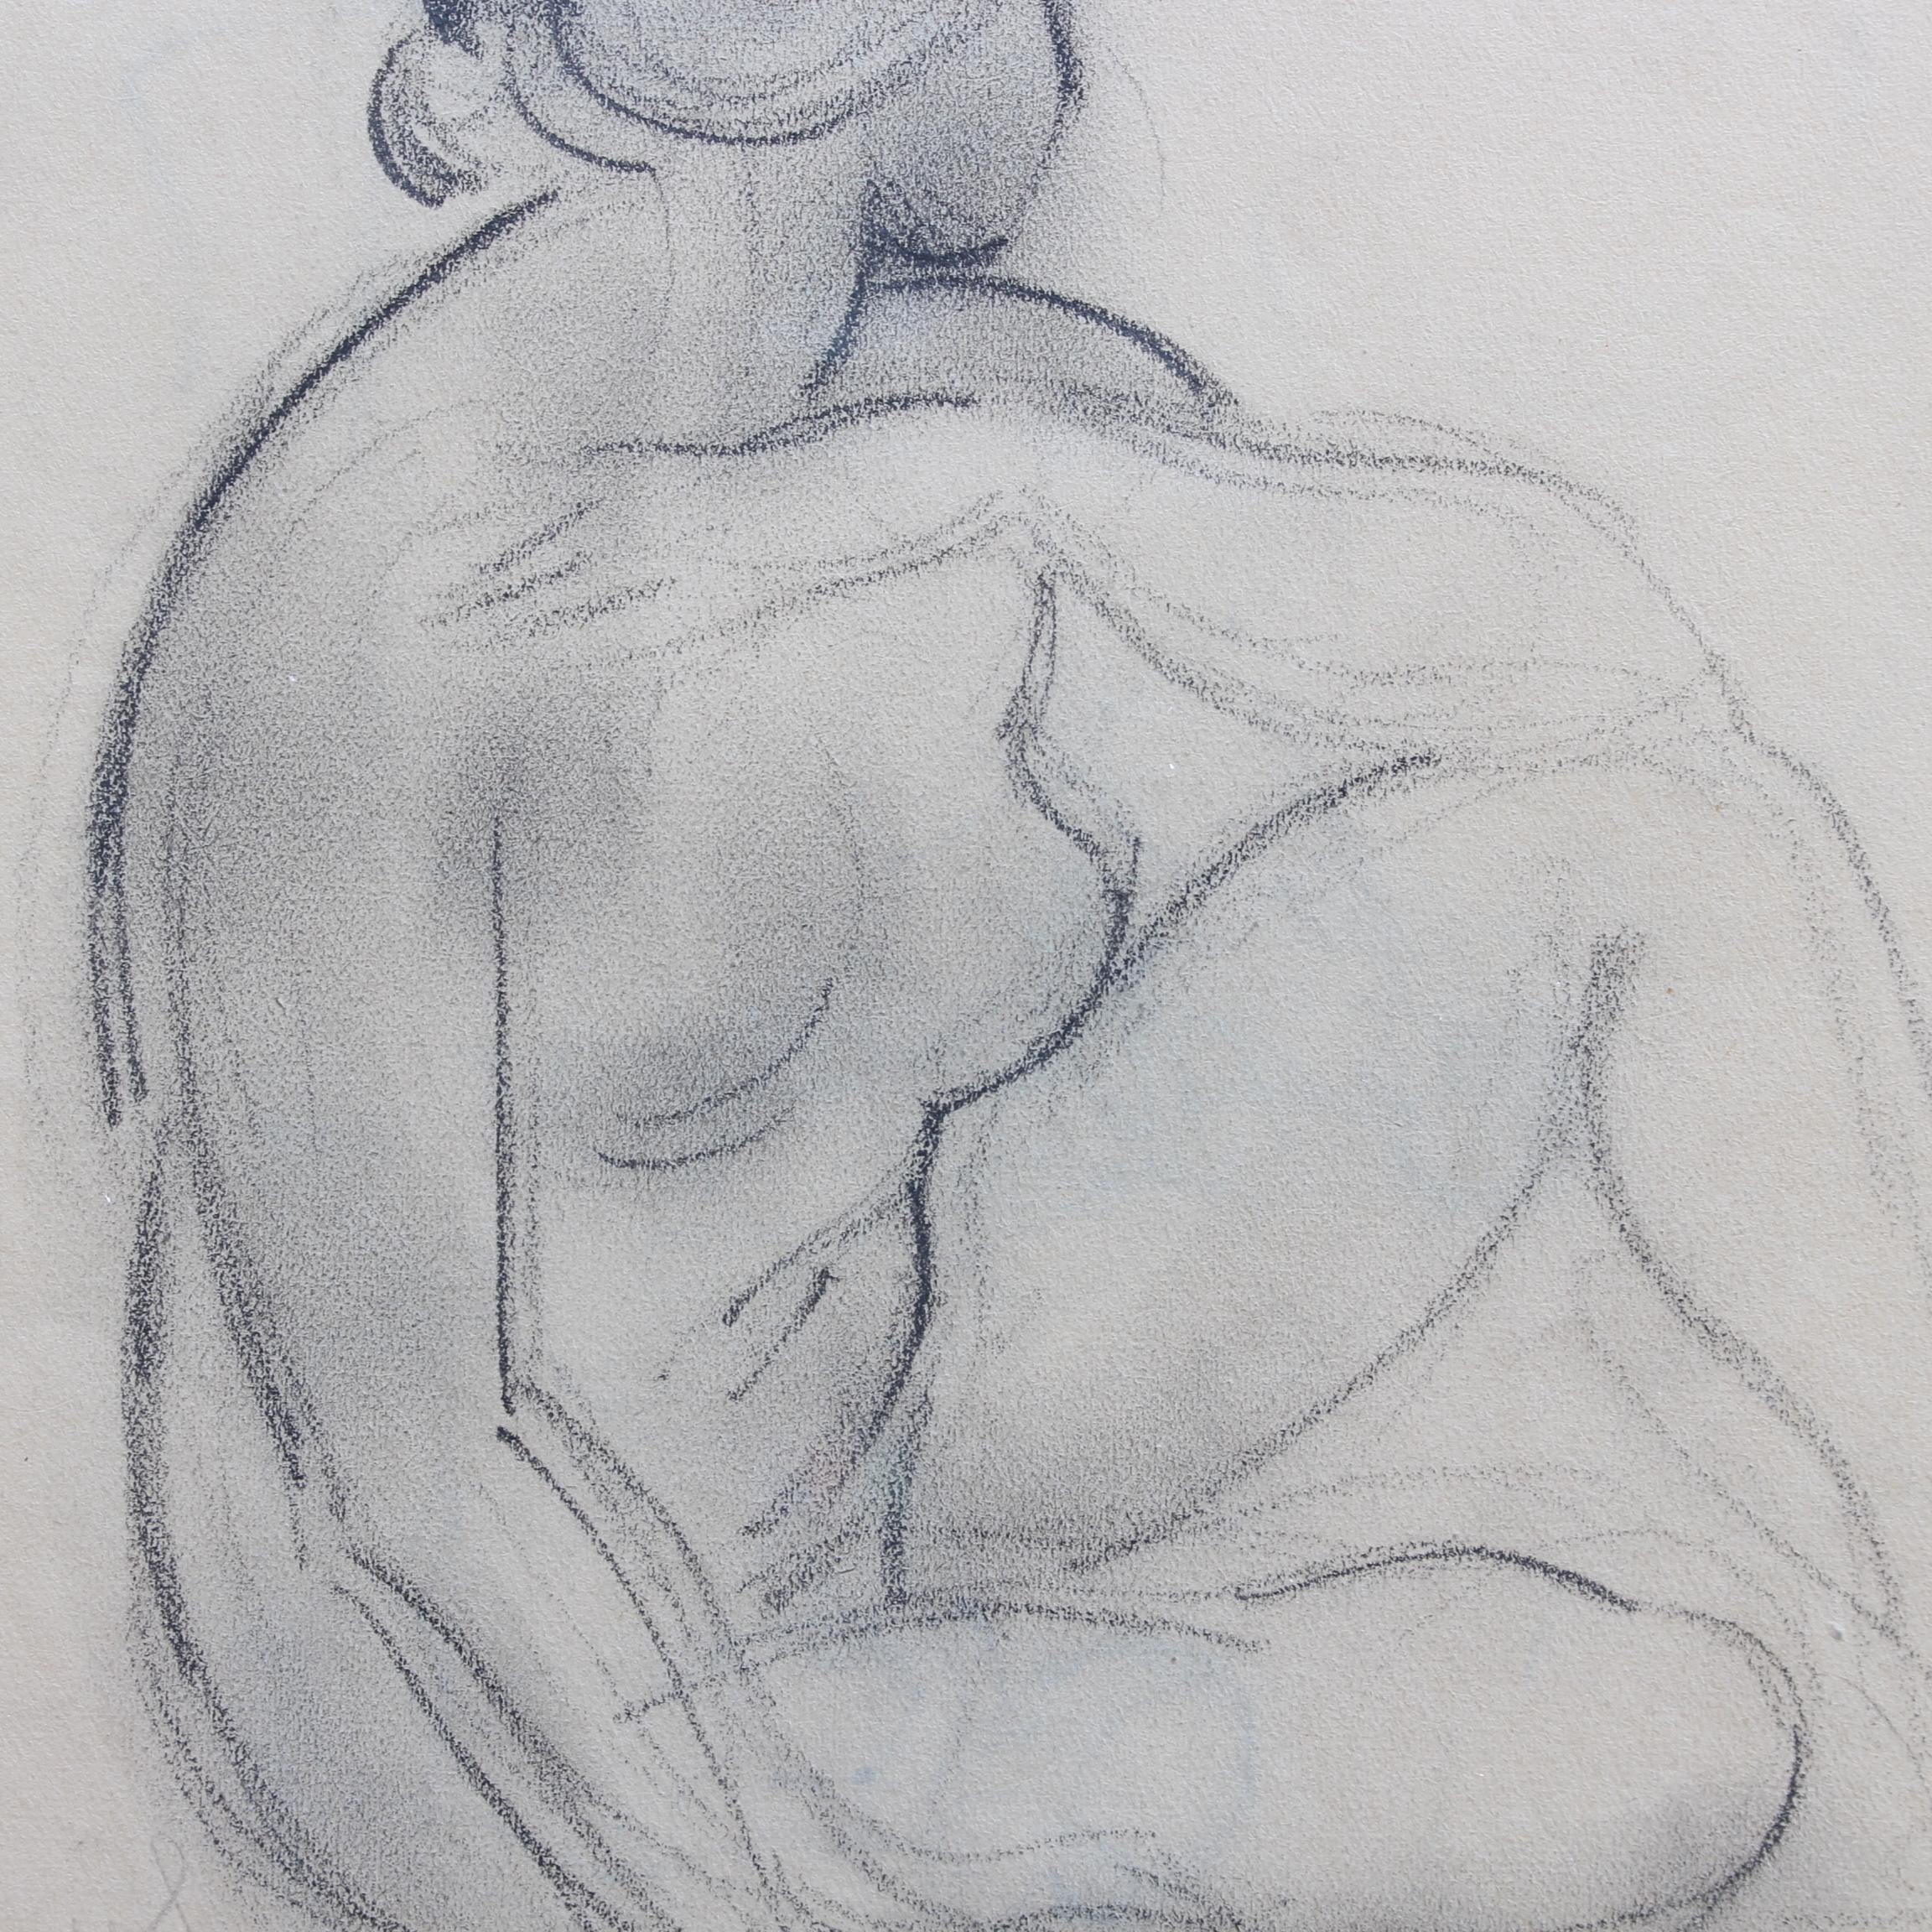 'Posing Nude', pencil on fine art paper, by French artist, Guillaume Dulac (circa 1920s). An artist known for his exquisite drawings - many are sketches for his larger oil paintings or other works - this piece is compelling because its image emerges